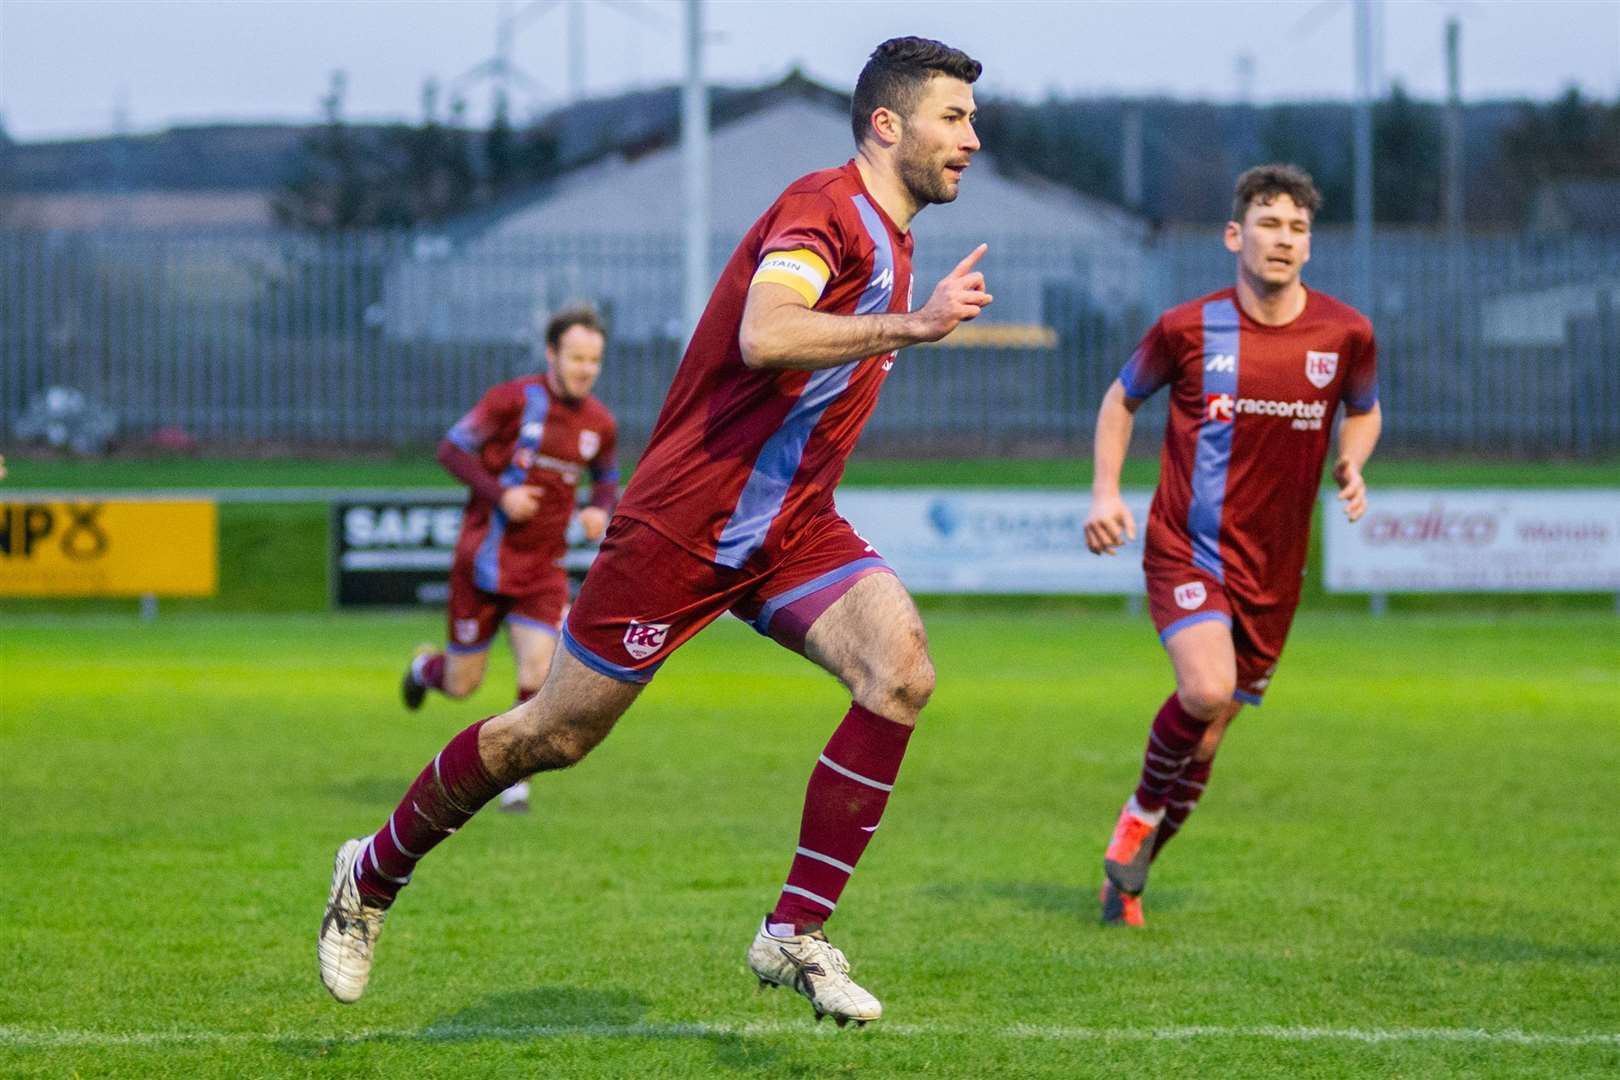 Keith forward Cammy Keith wheels away to celebrate opening the scoring for the Maroons...Keith FC (2) vs Hill of Beath Hawthorn FC (2) - Keith FC win 4-2 after extra time - Scottish Cup First Round - Kynoch Park, 26/12/2020...Picture: Daniel Forsyth..